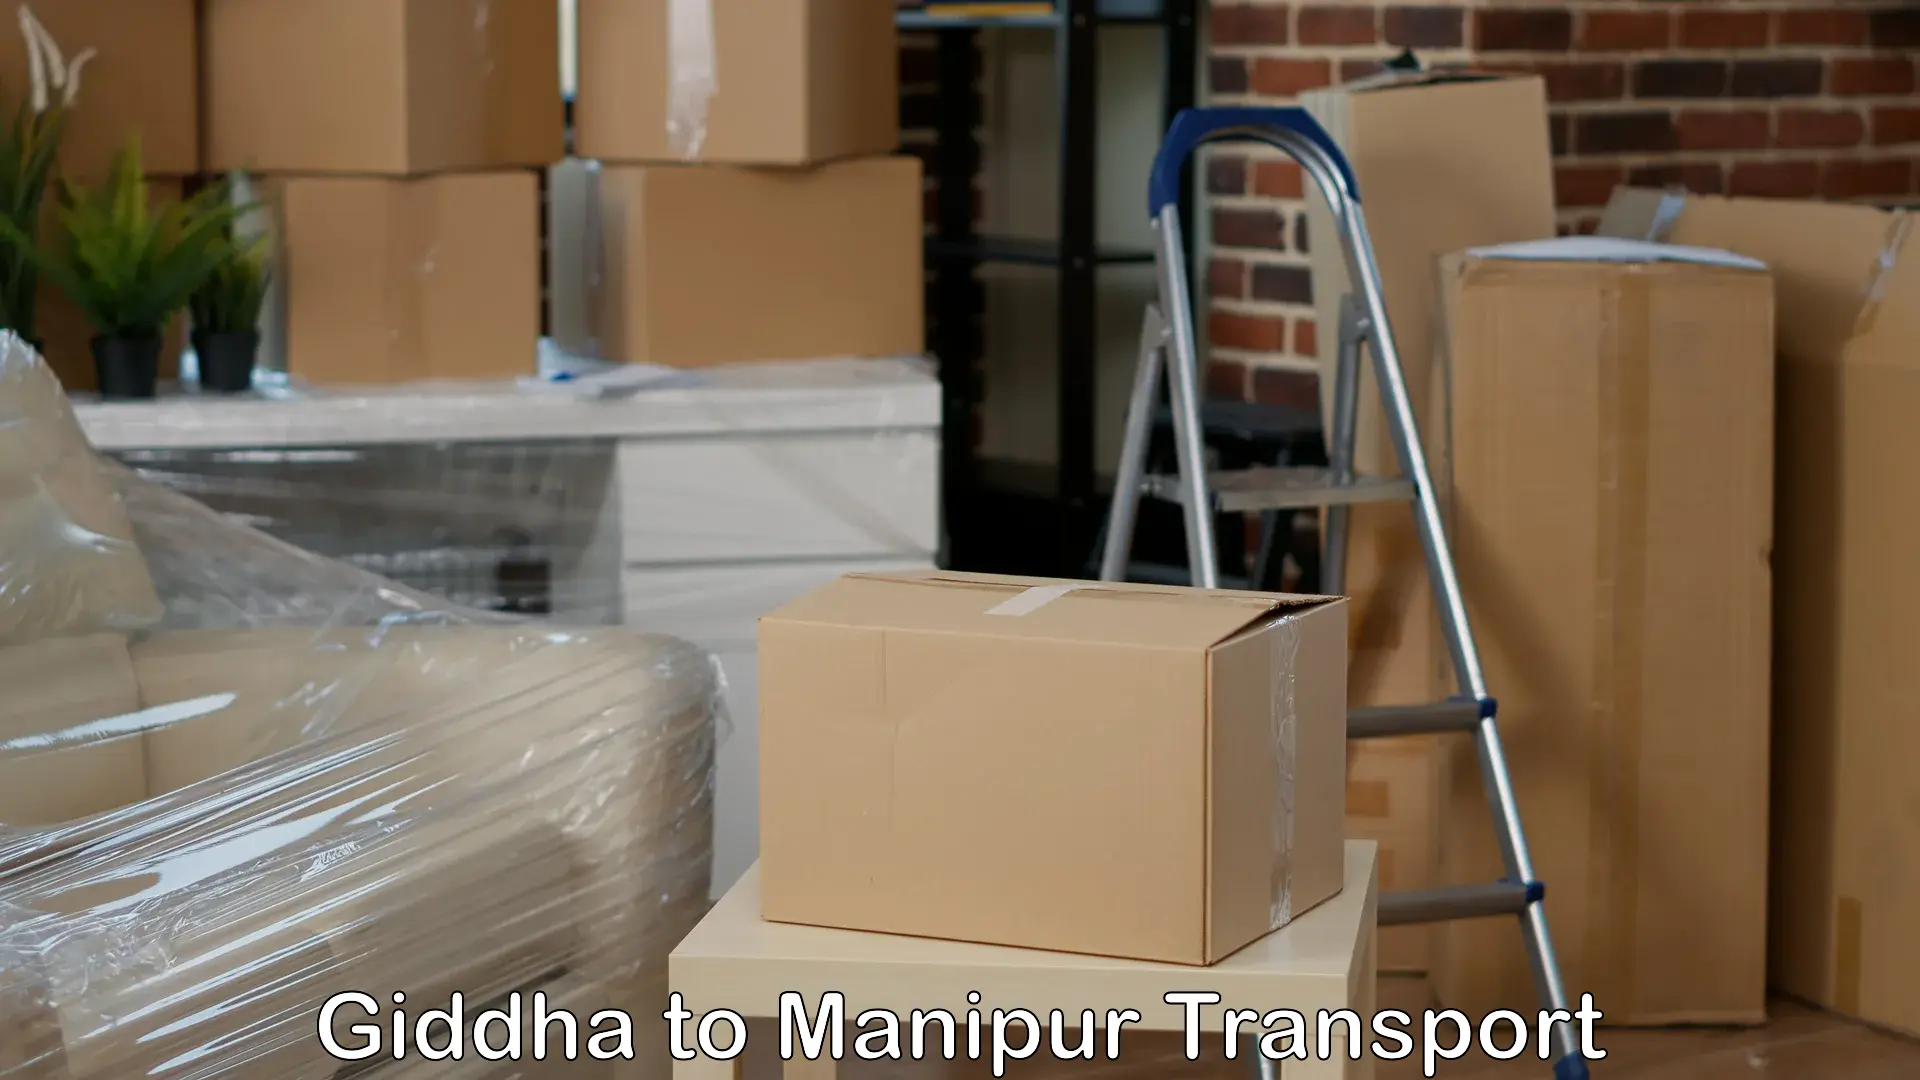 Delivery service Giddha to Manipur